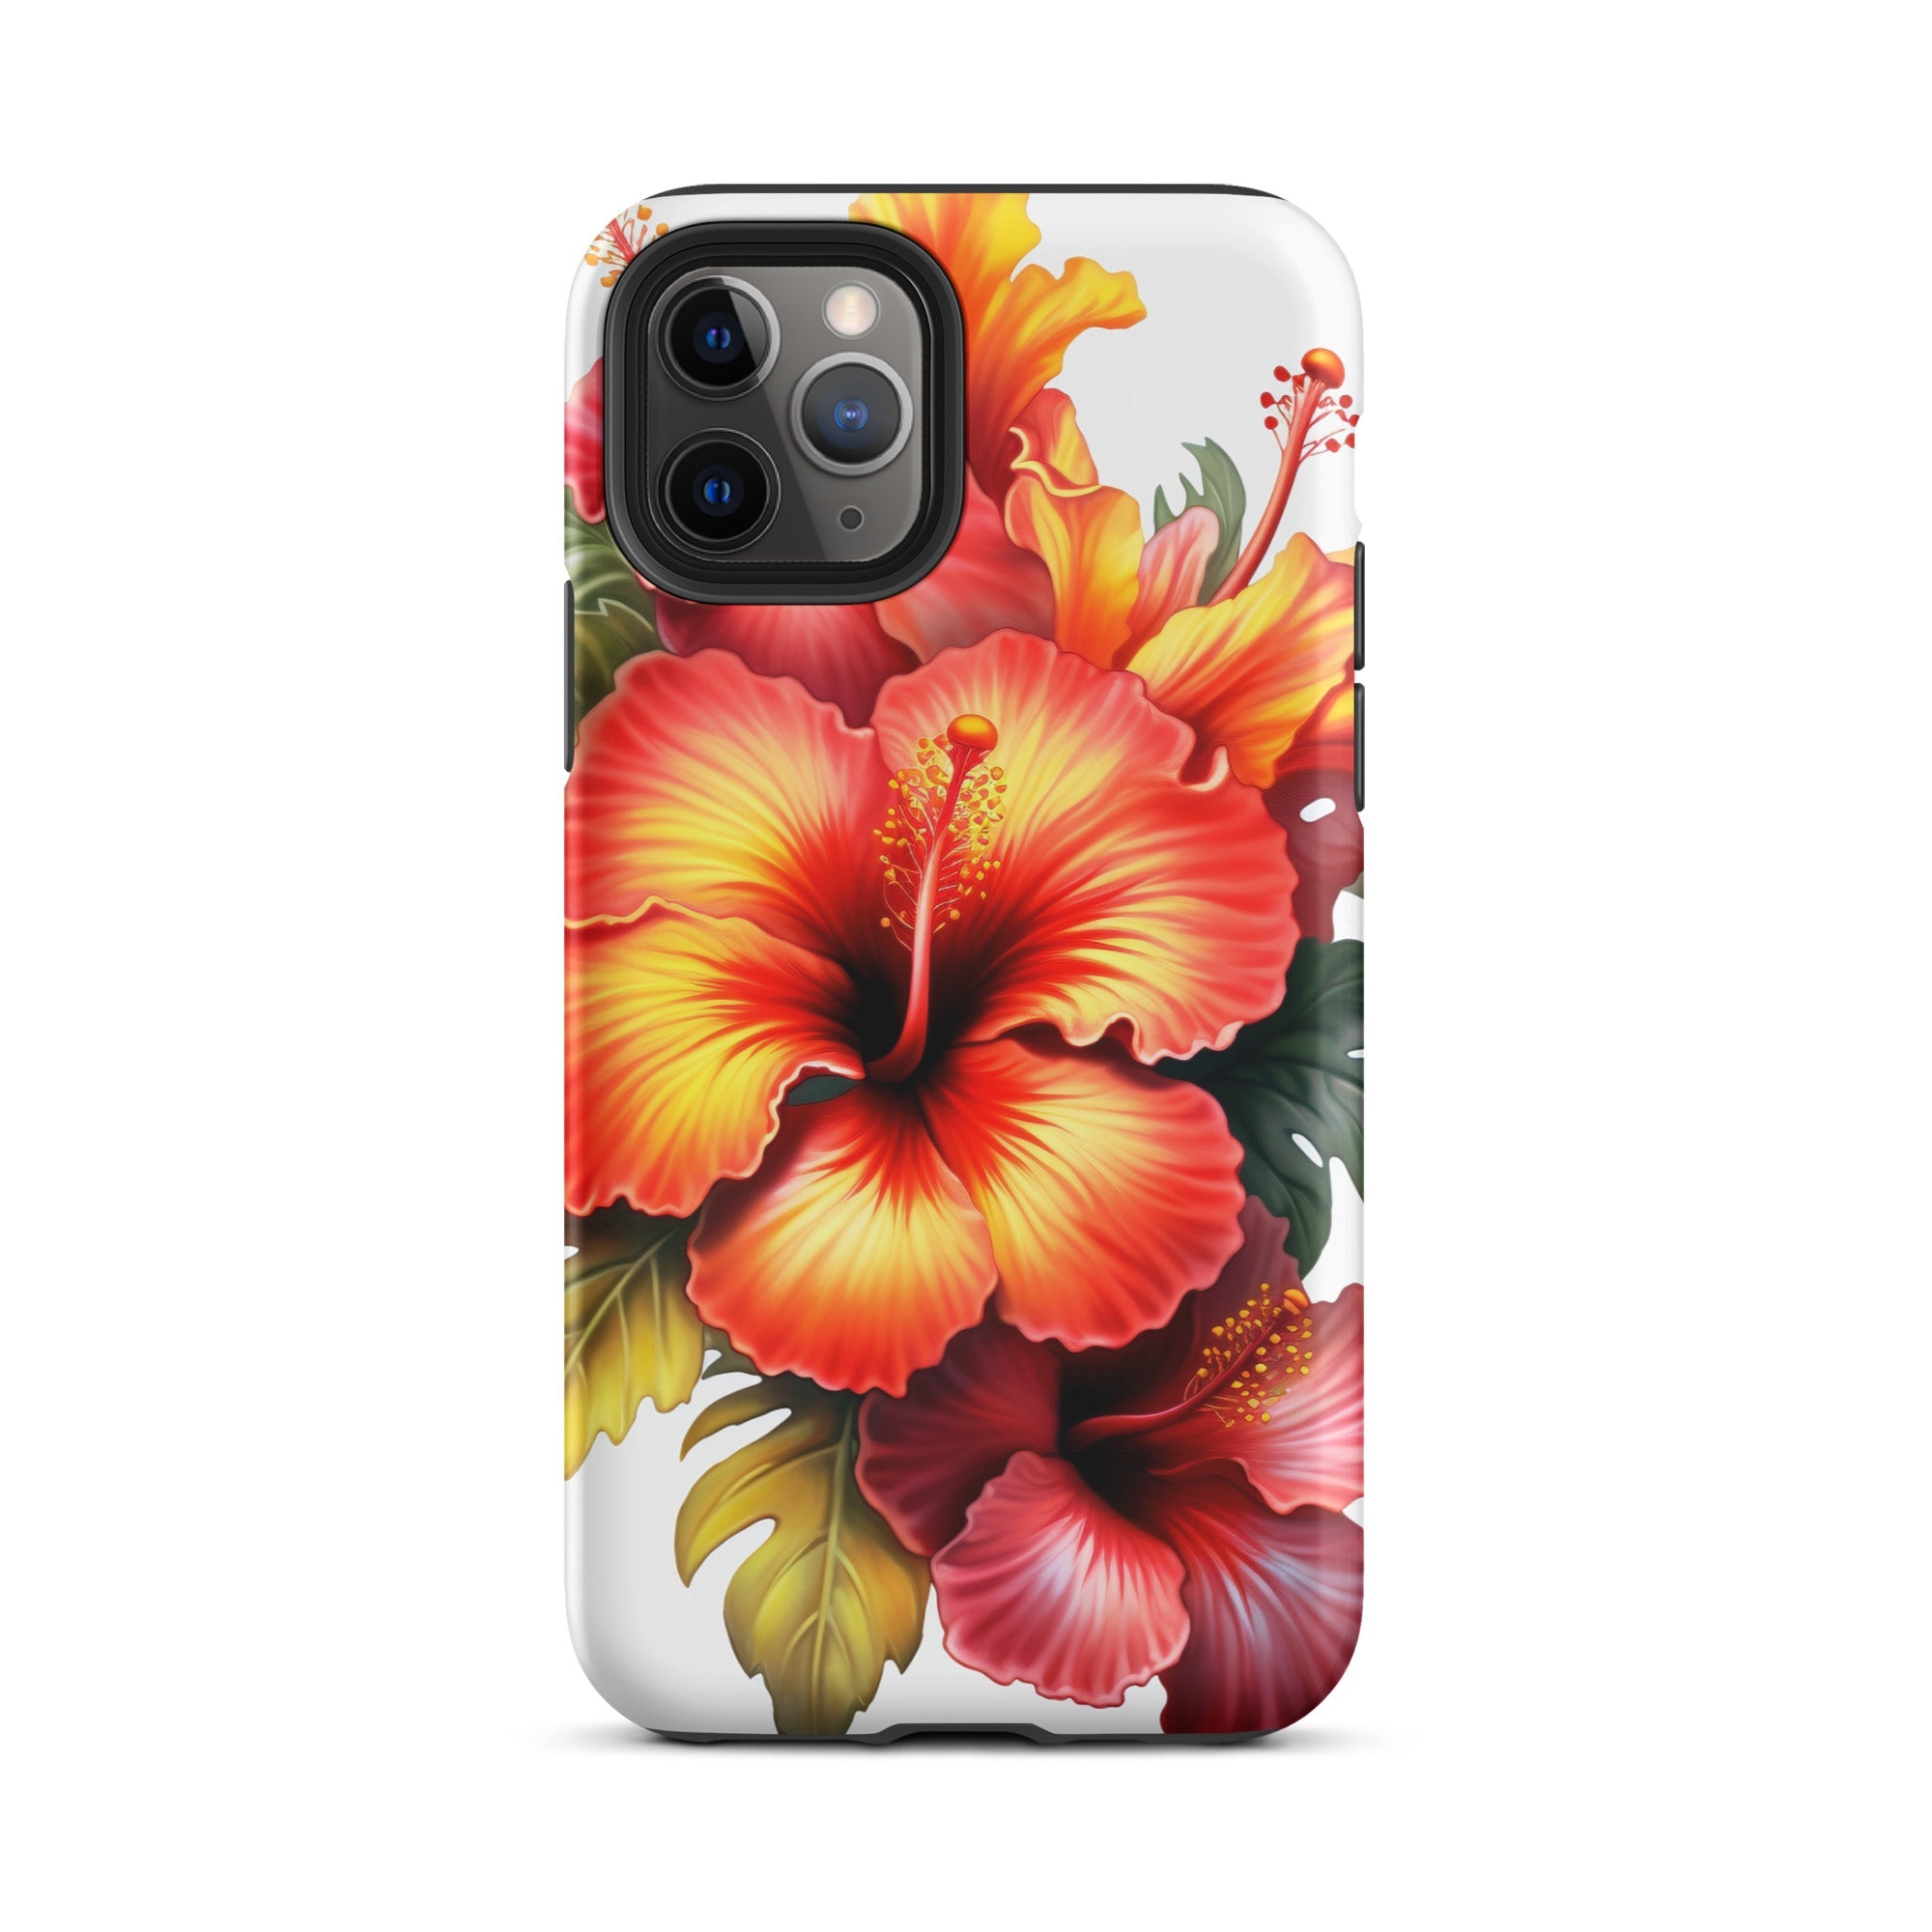 Hibiscus Flower iPhone Case by Visual Verse - Image 4